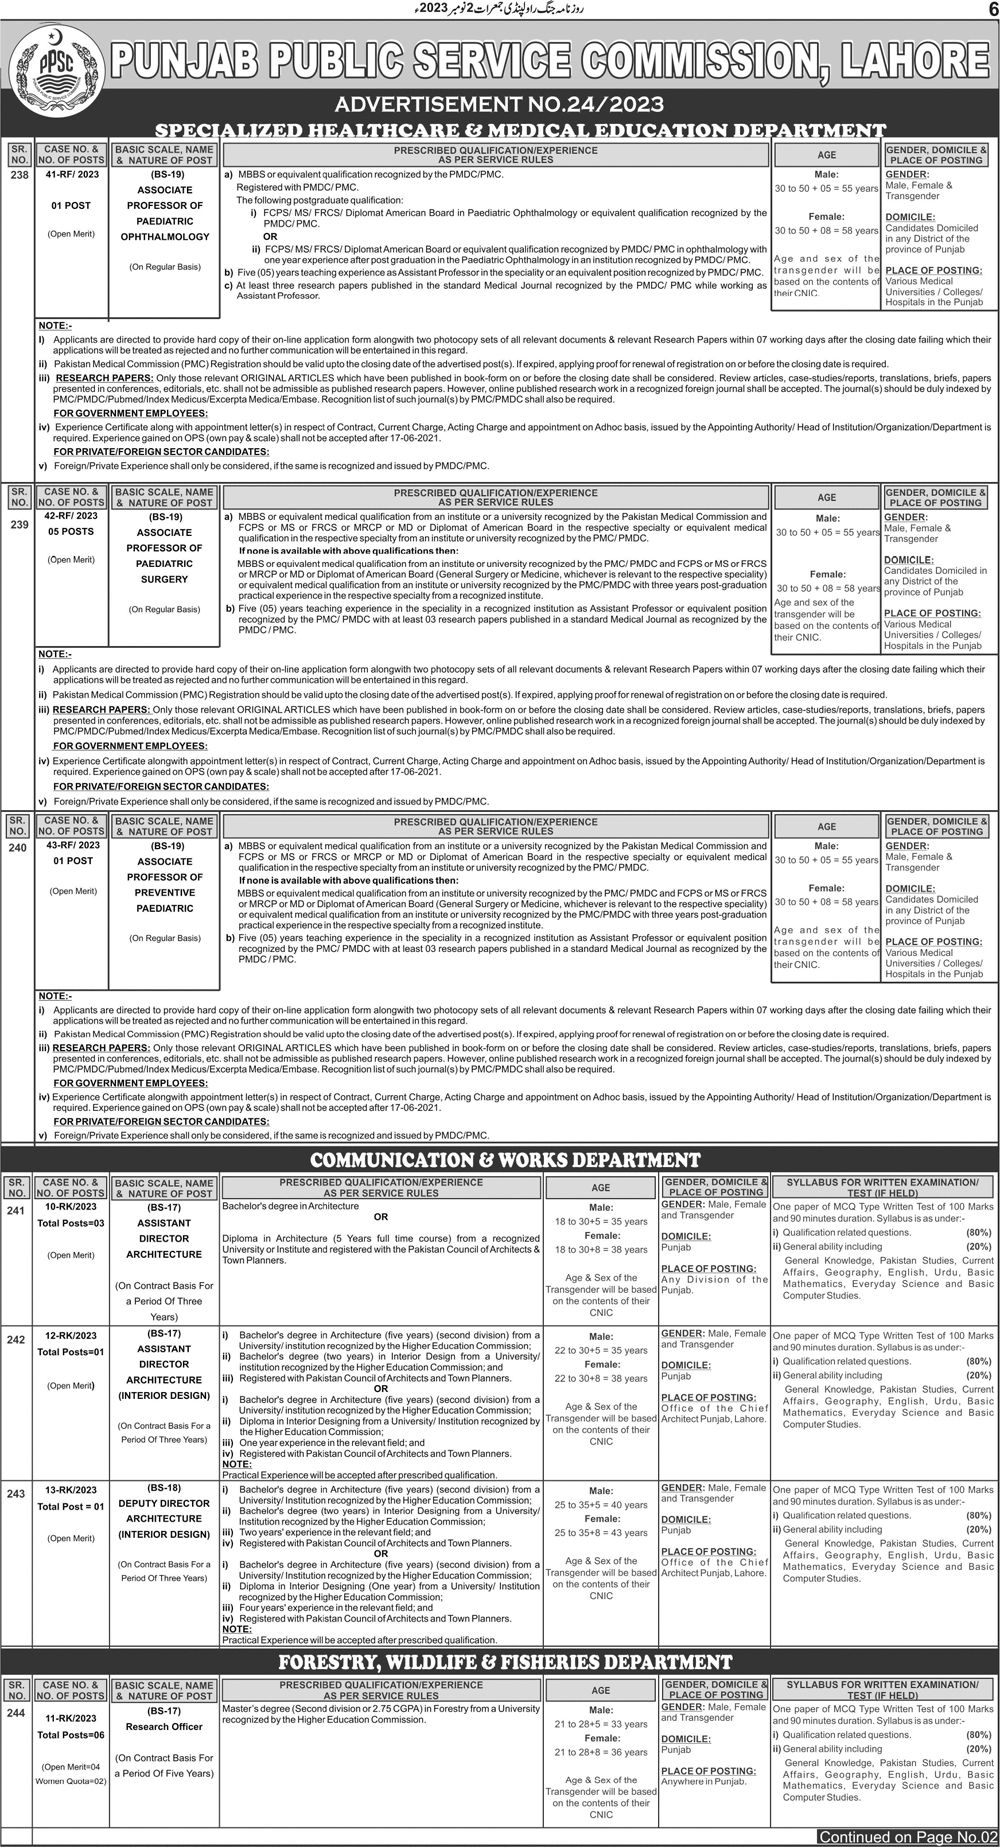 PPSC Job Vacancies in Punjab Police and Departments of Punjab